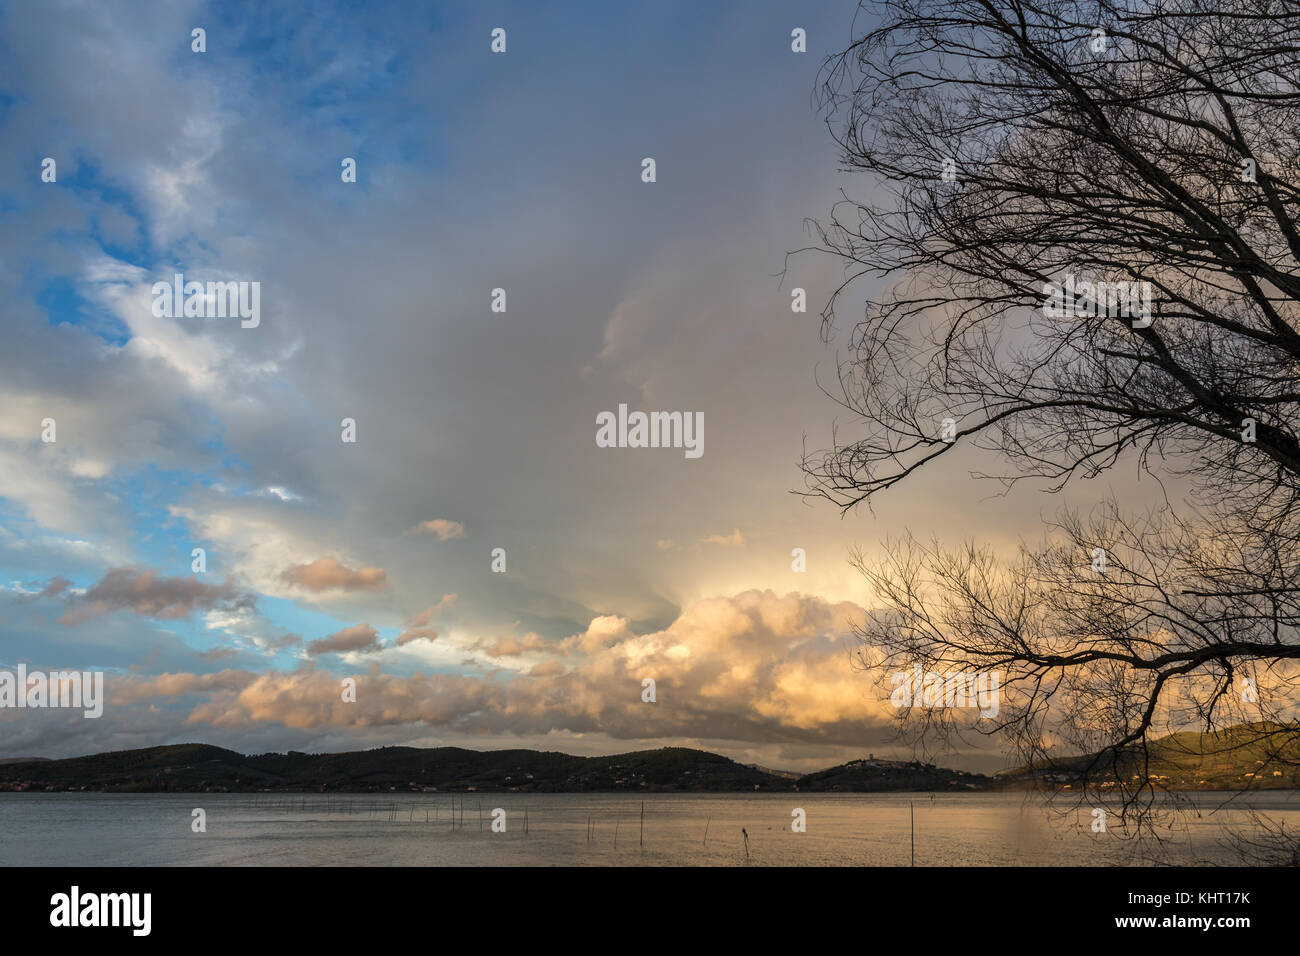 Tree branches on a lake shore at sunset, with beautiful, warm colored clouds Stock Photo